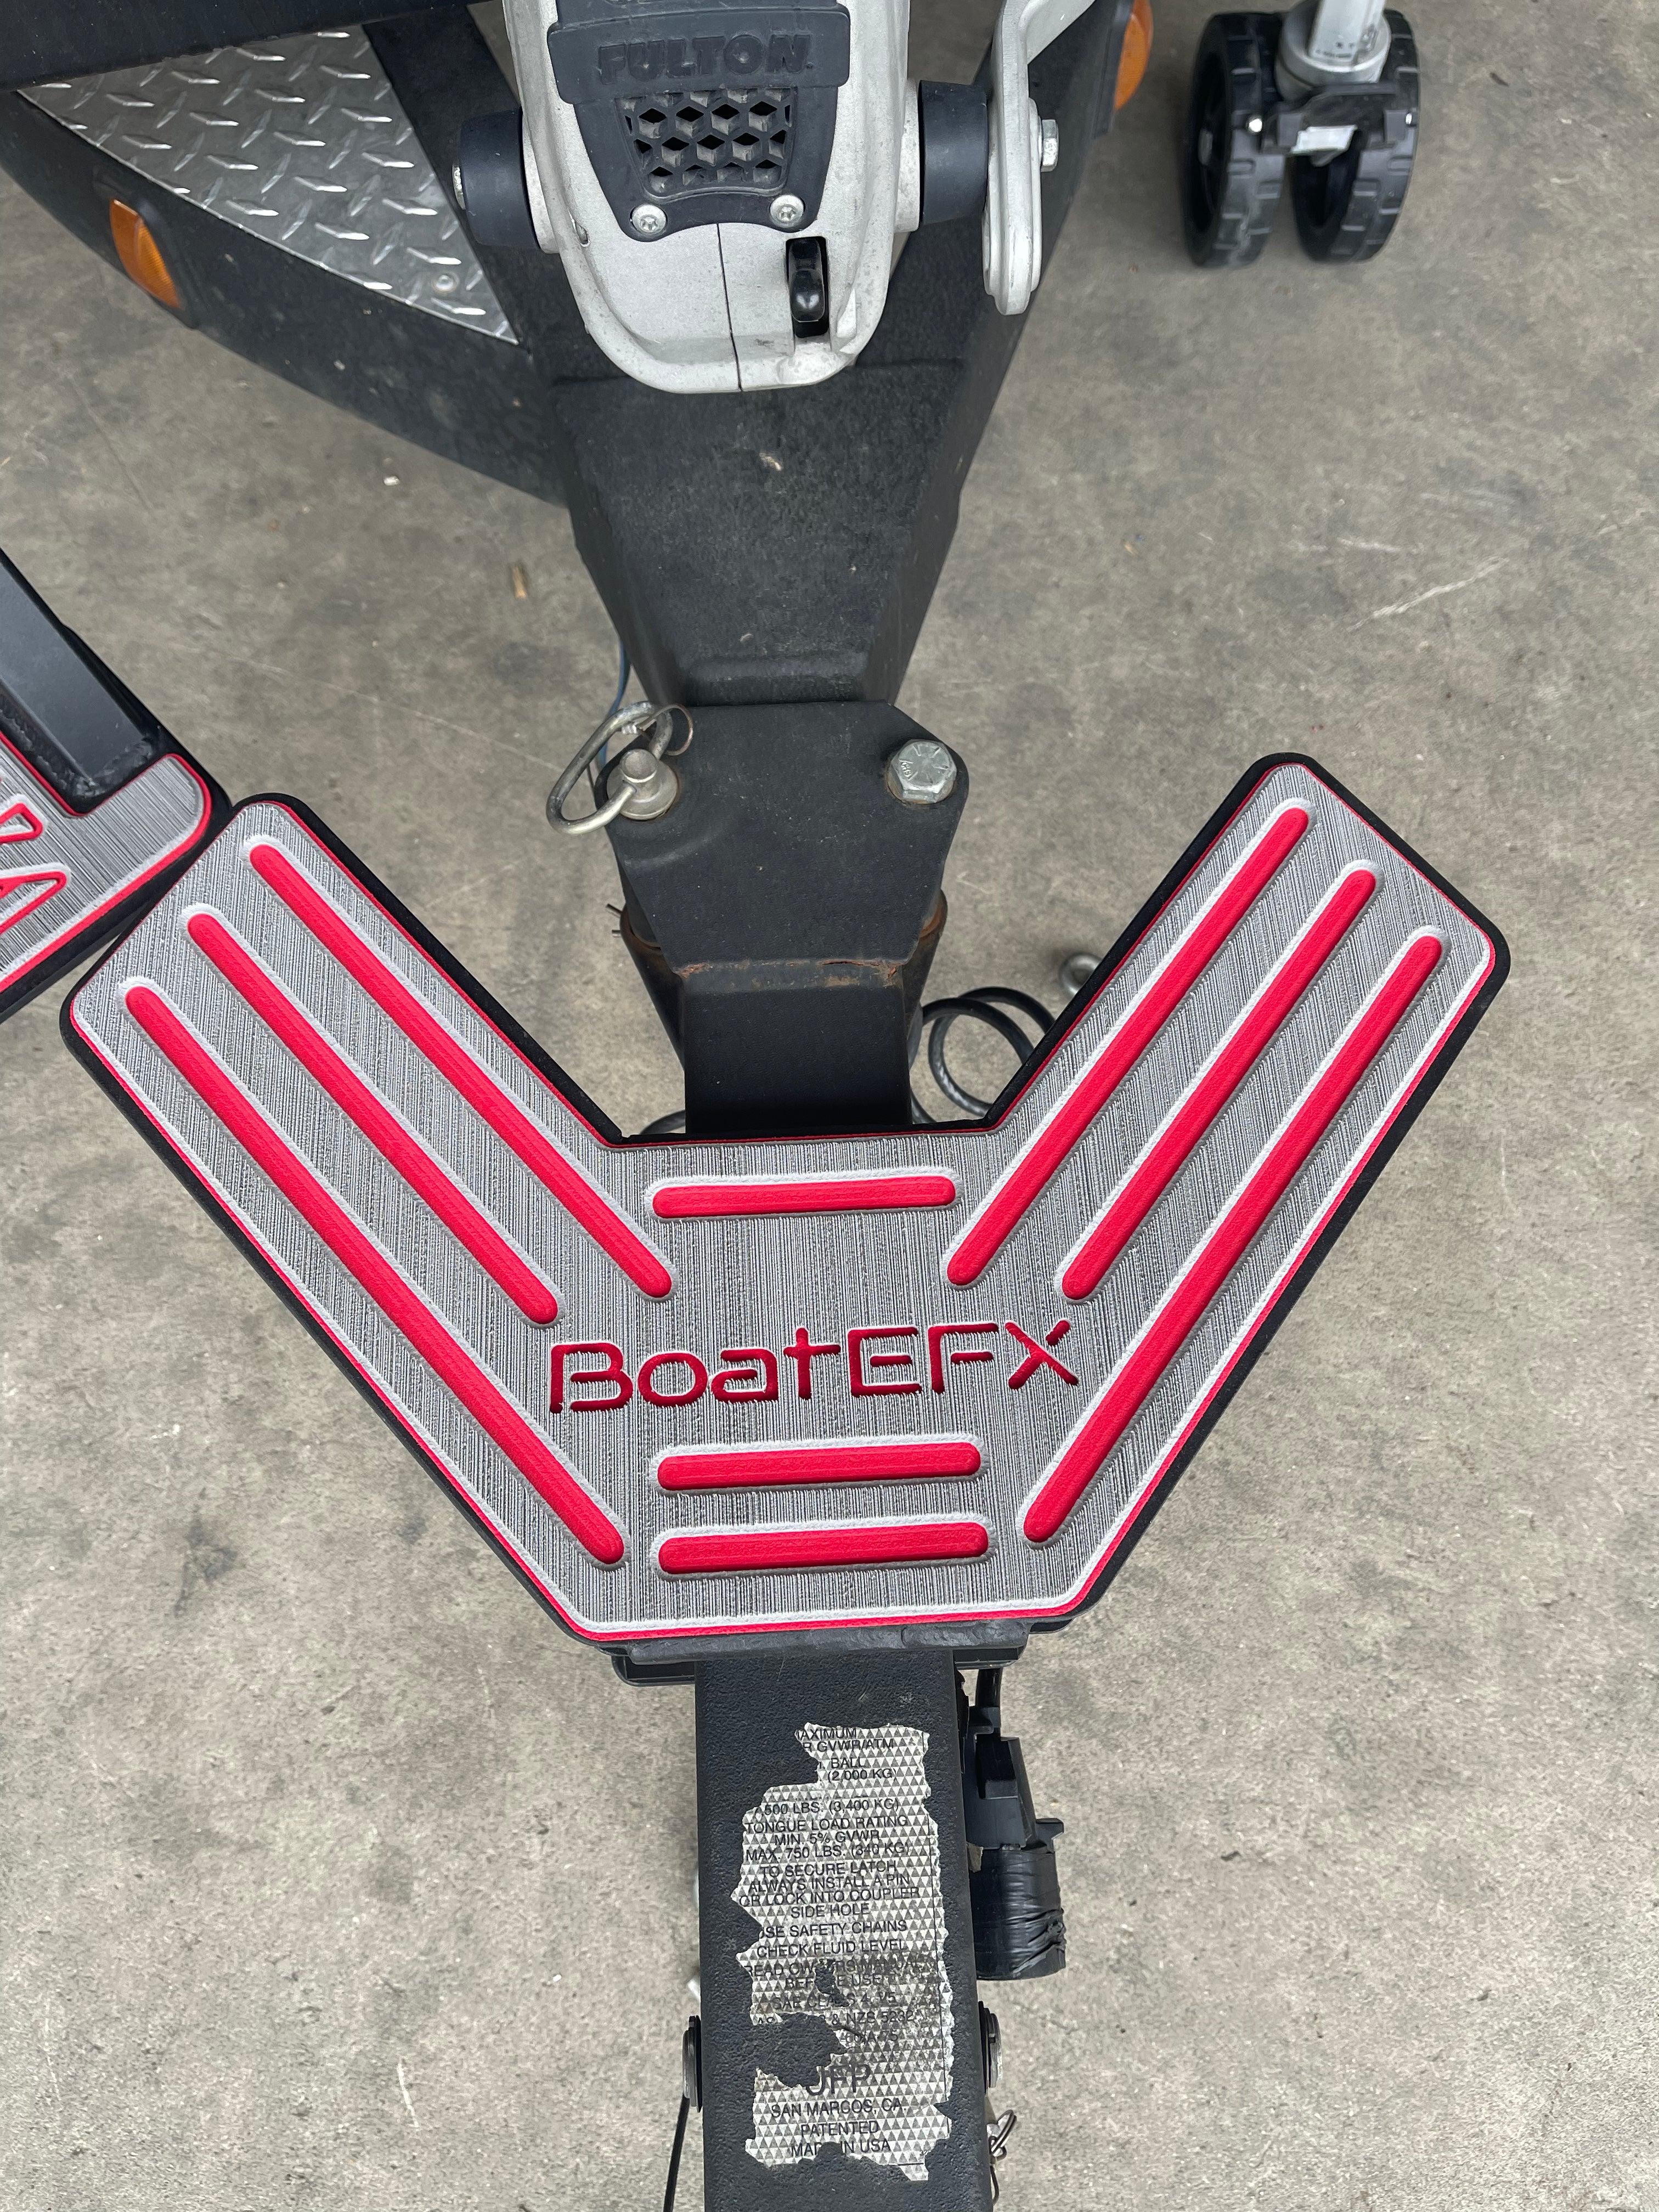 Booma Step Upgrade step traction to foam Trax - BoatEFX